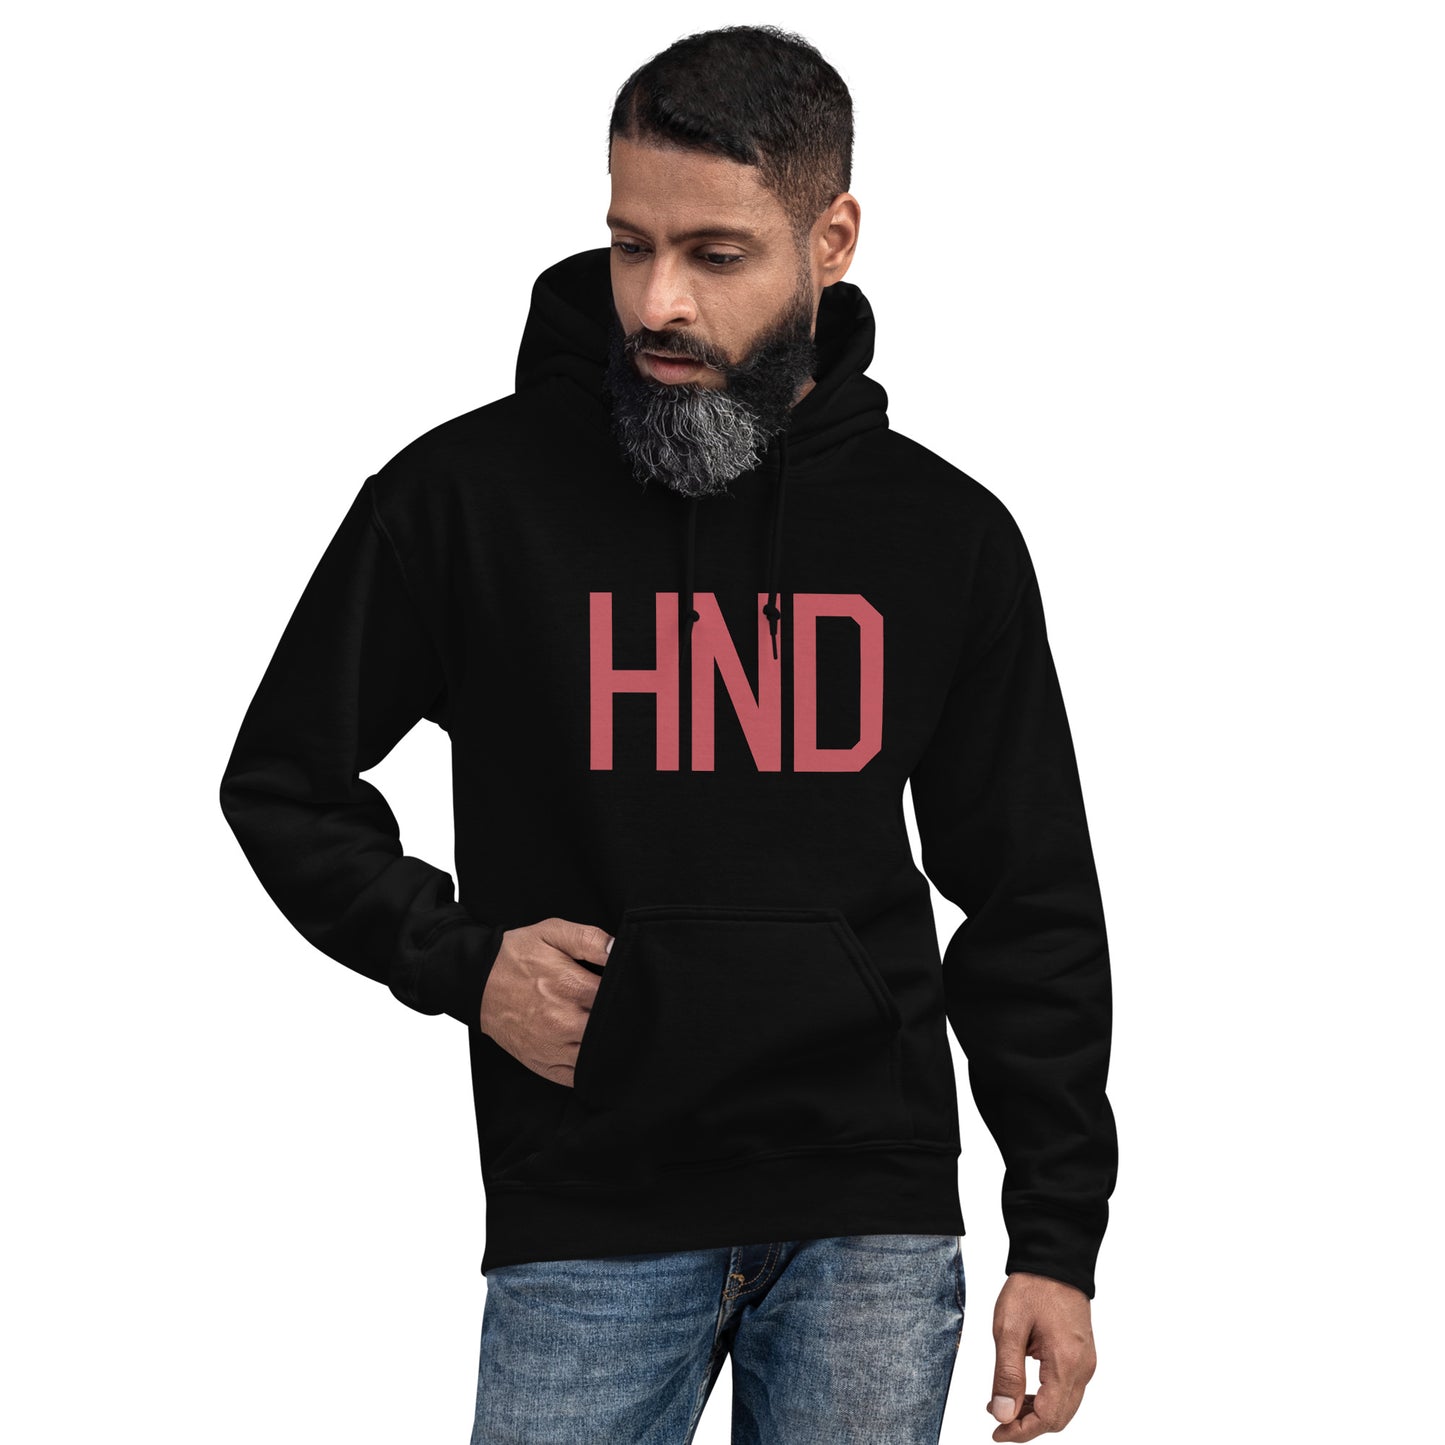 Aviation Enthusiast Hoodie - Deep Pink Graphic • HND Tokyo • YHM Designs - Image 05